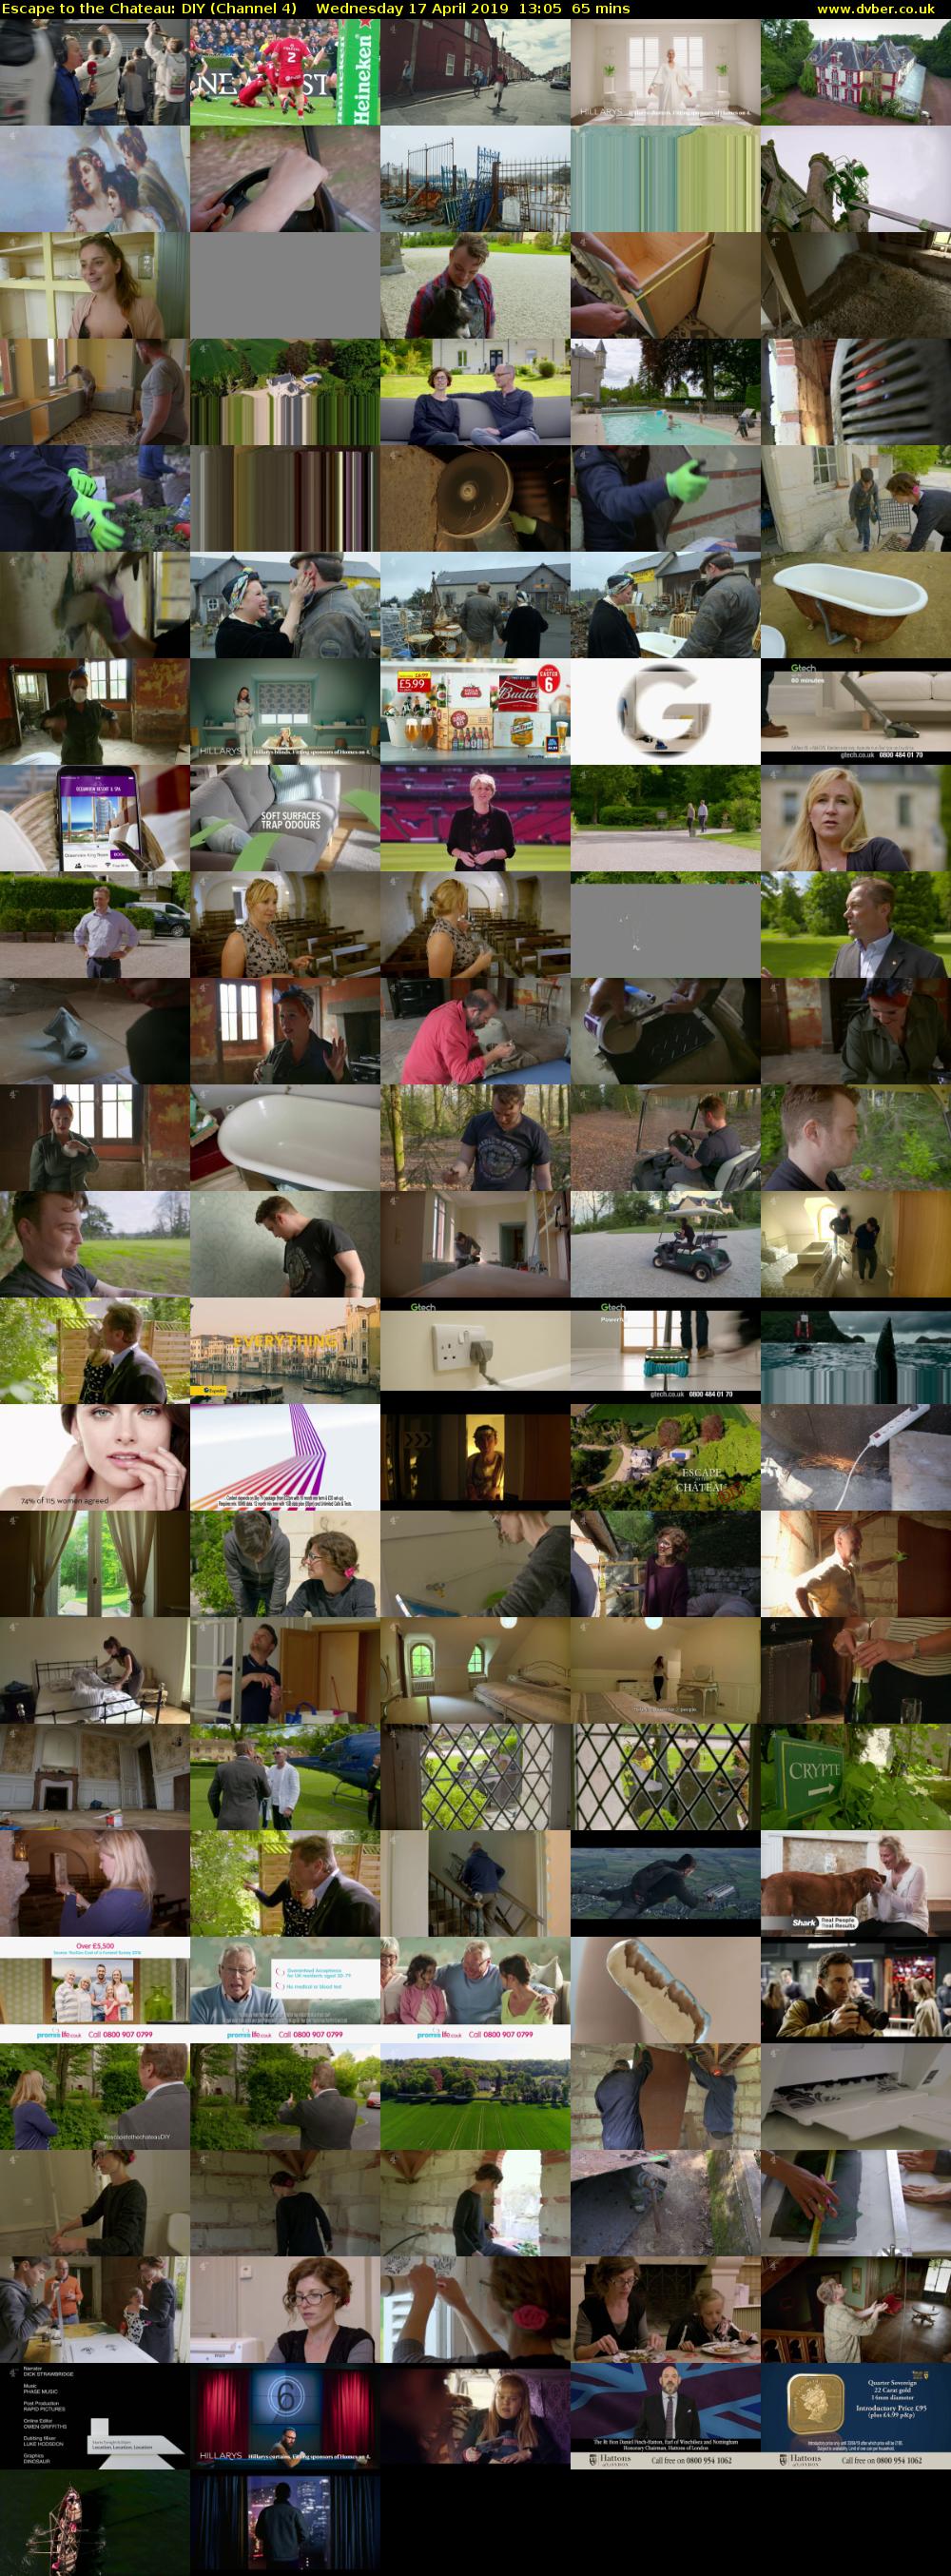 Escape to the Chateau: DIY (Channel 4) Wednesday 17 April 2019 13:05 - 14:10